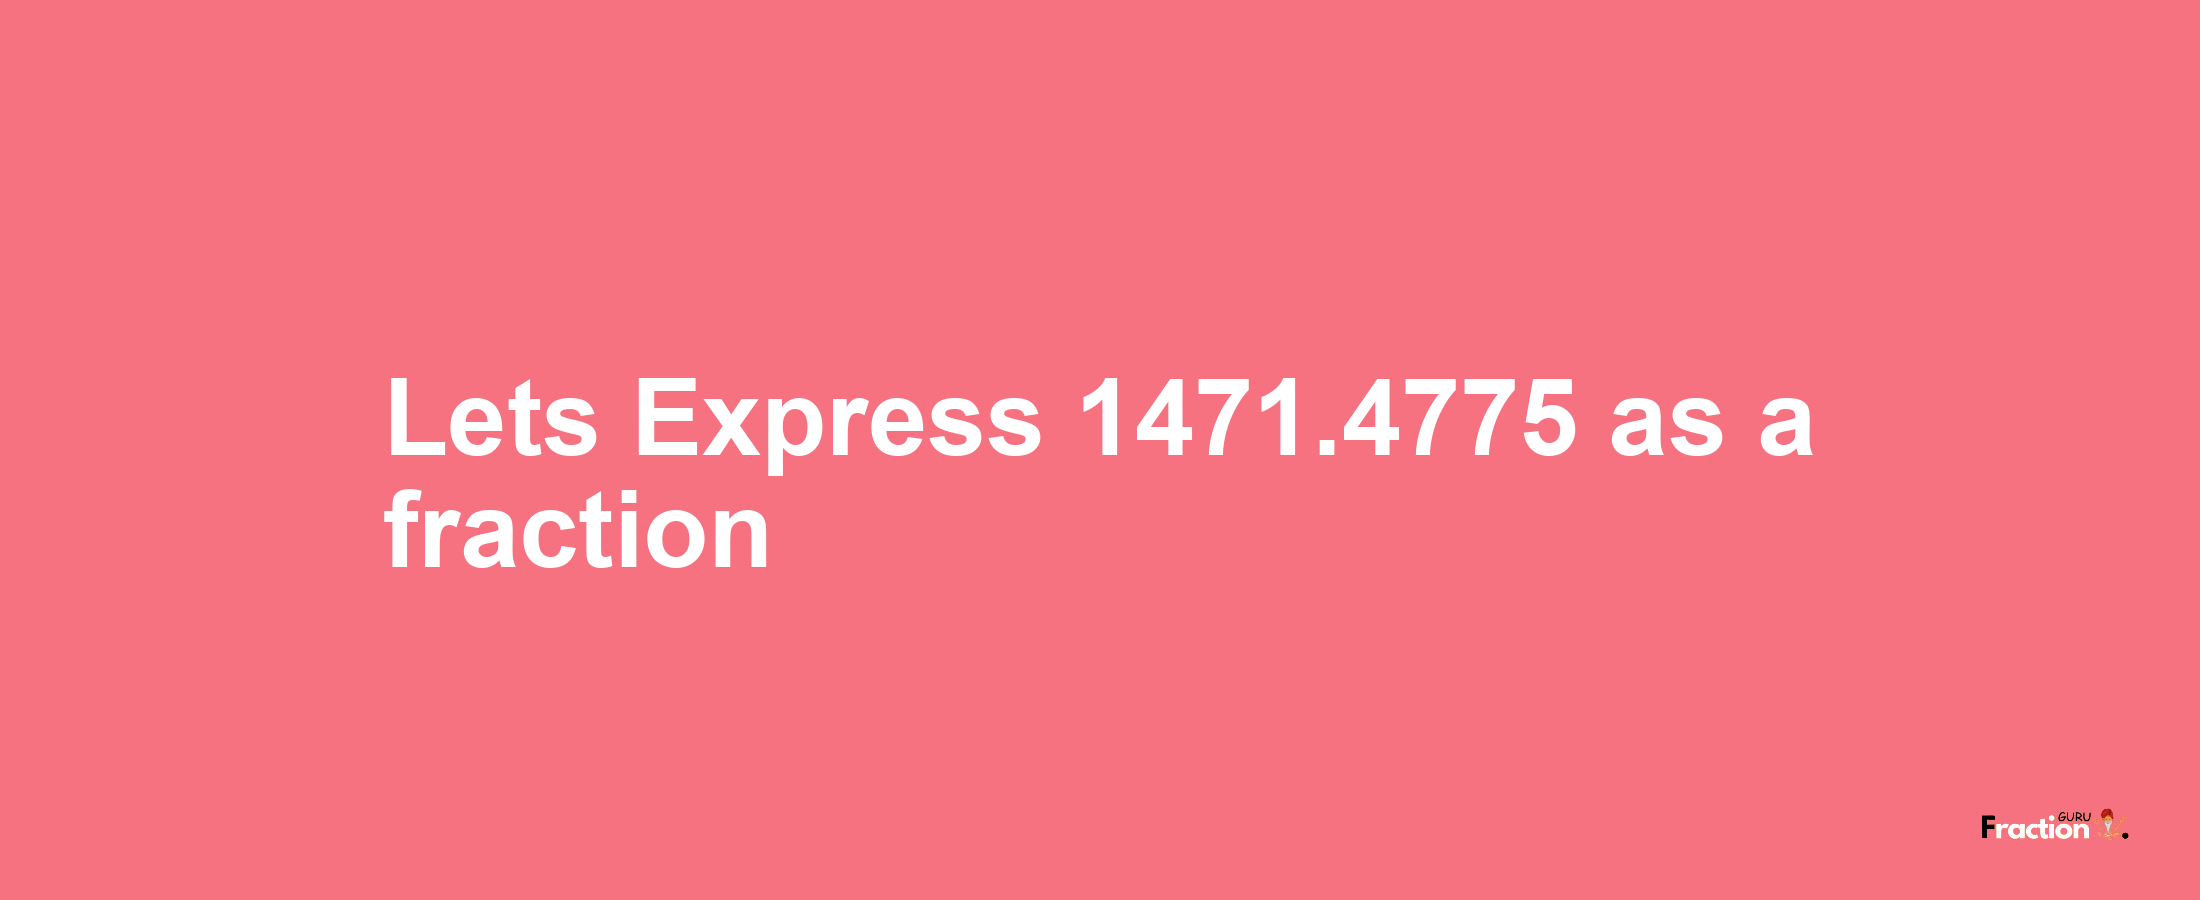 Lets Express 1471.4775 as afraction